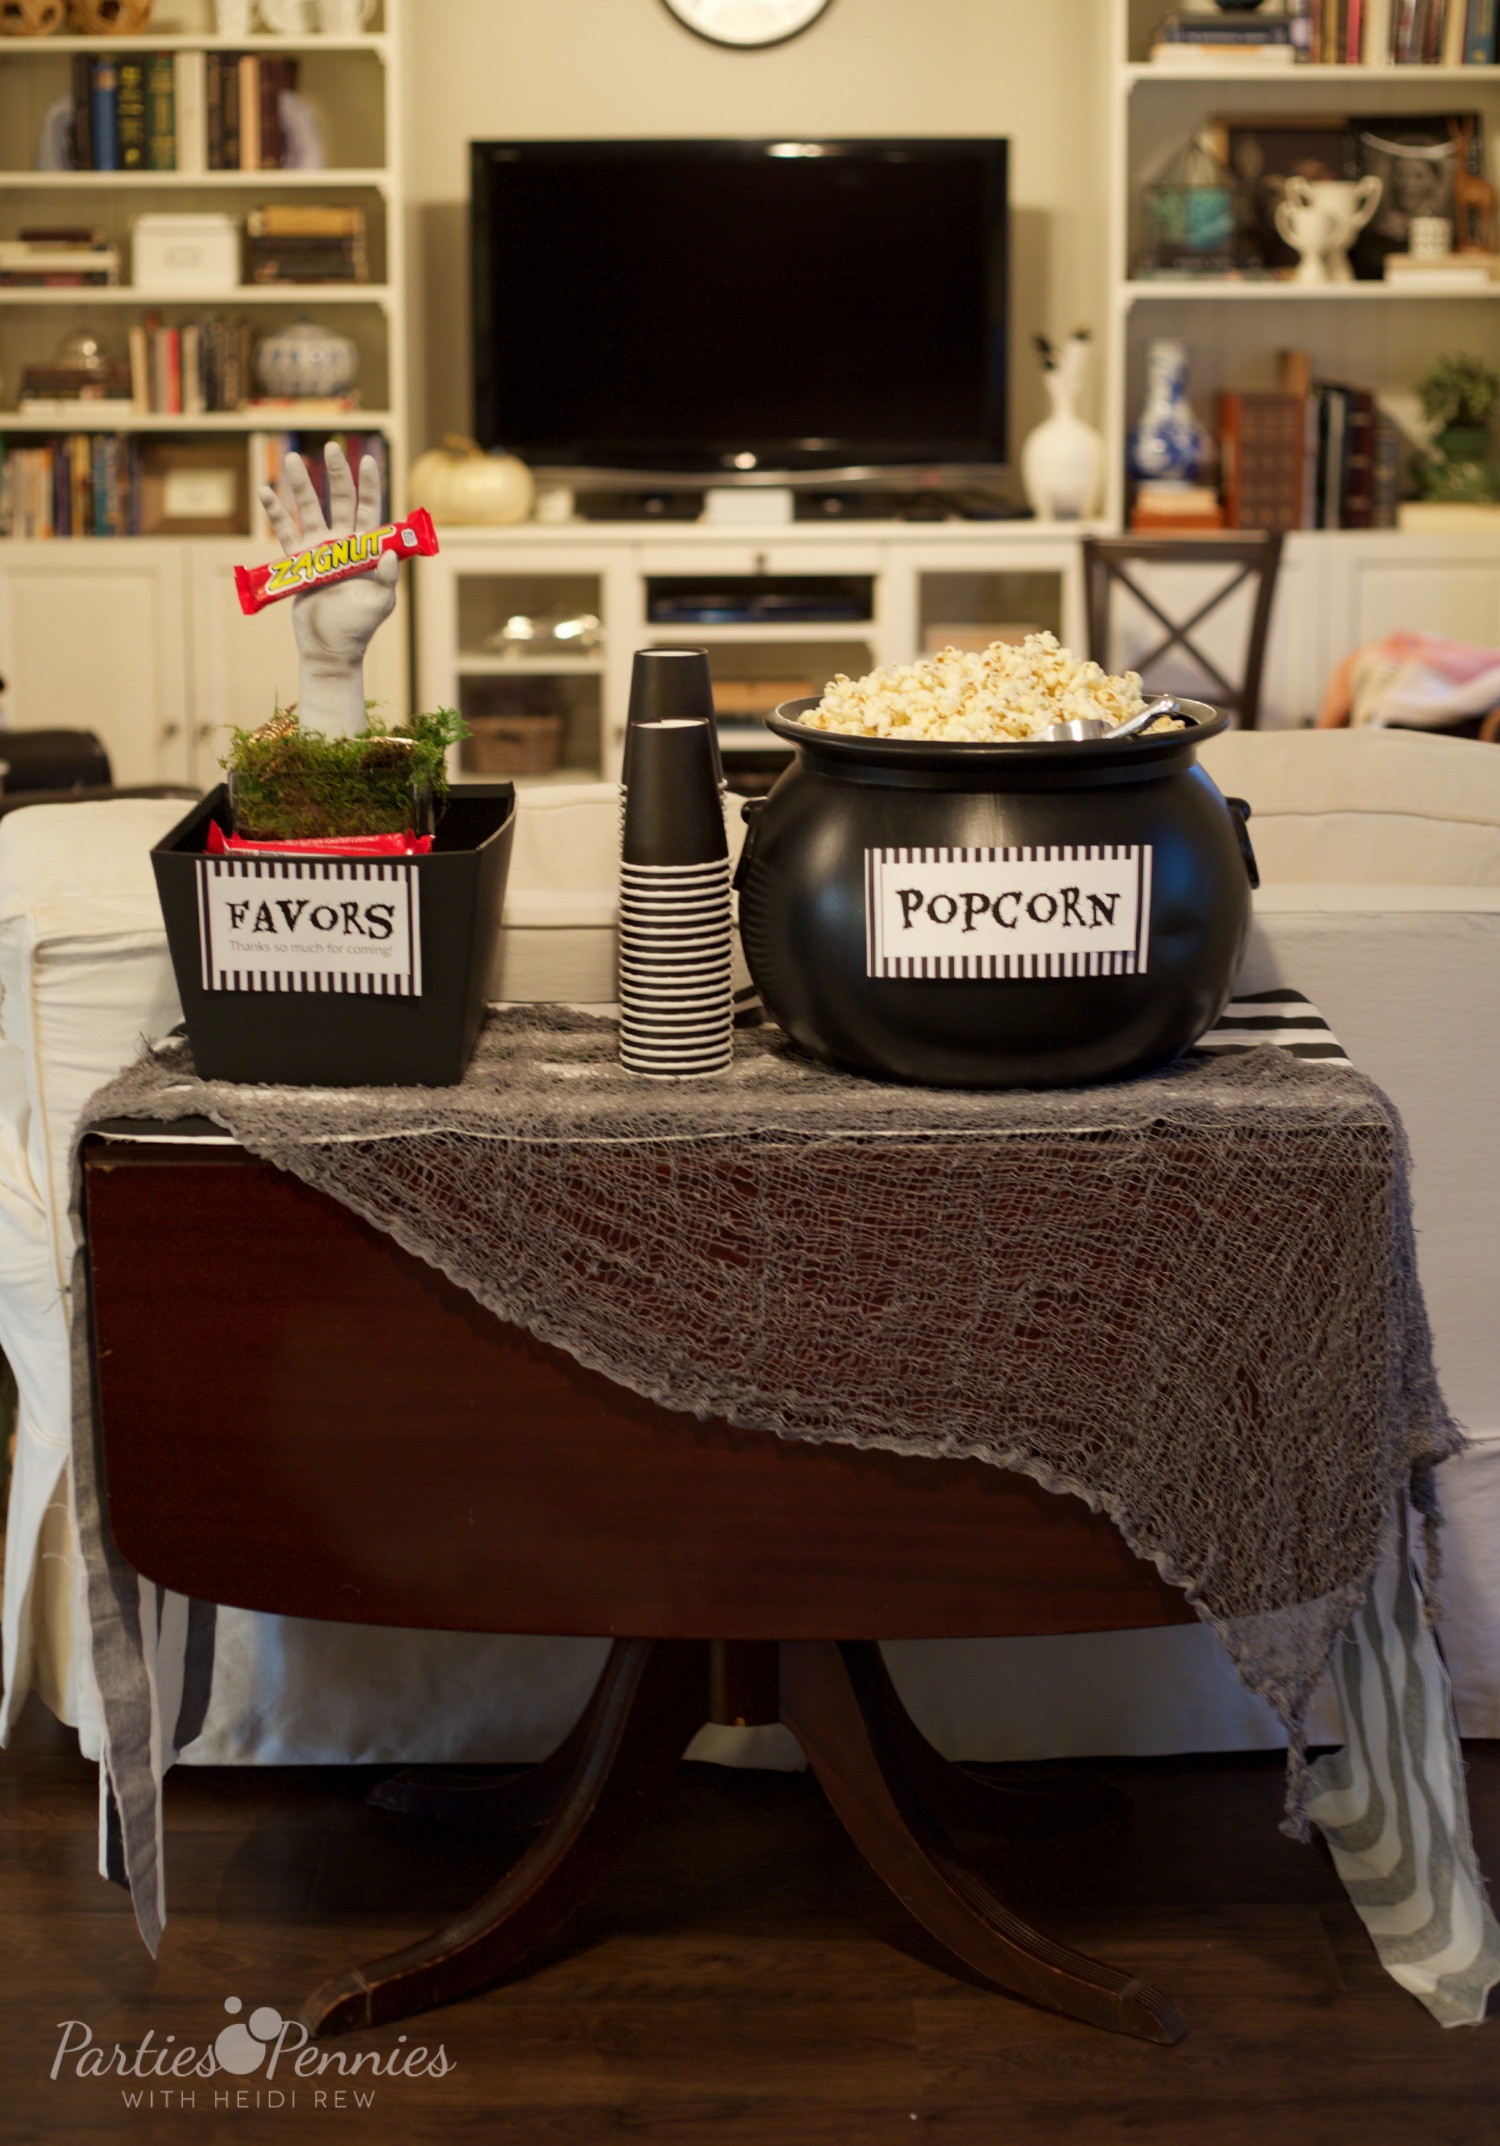 Beetlejuice Halloween Party | PartiesforPennies.com | Popcorn and Favors